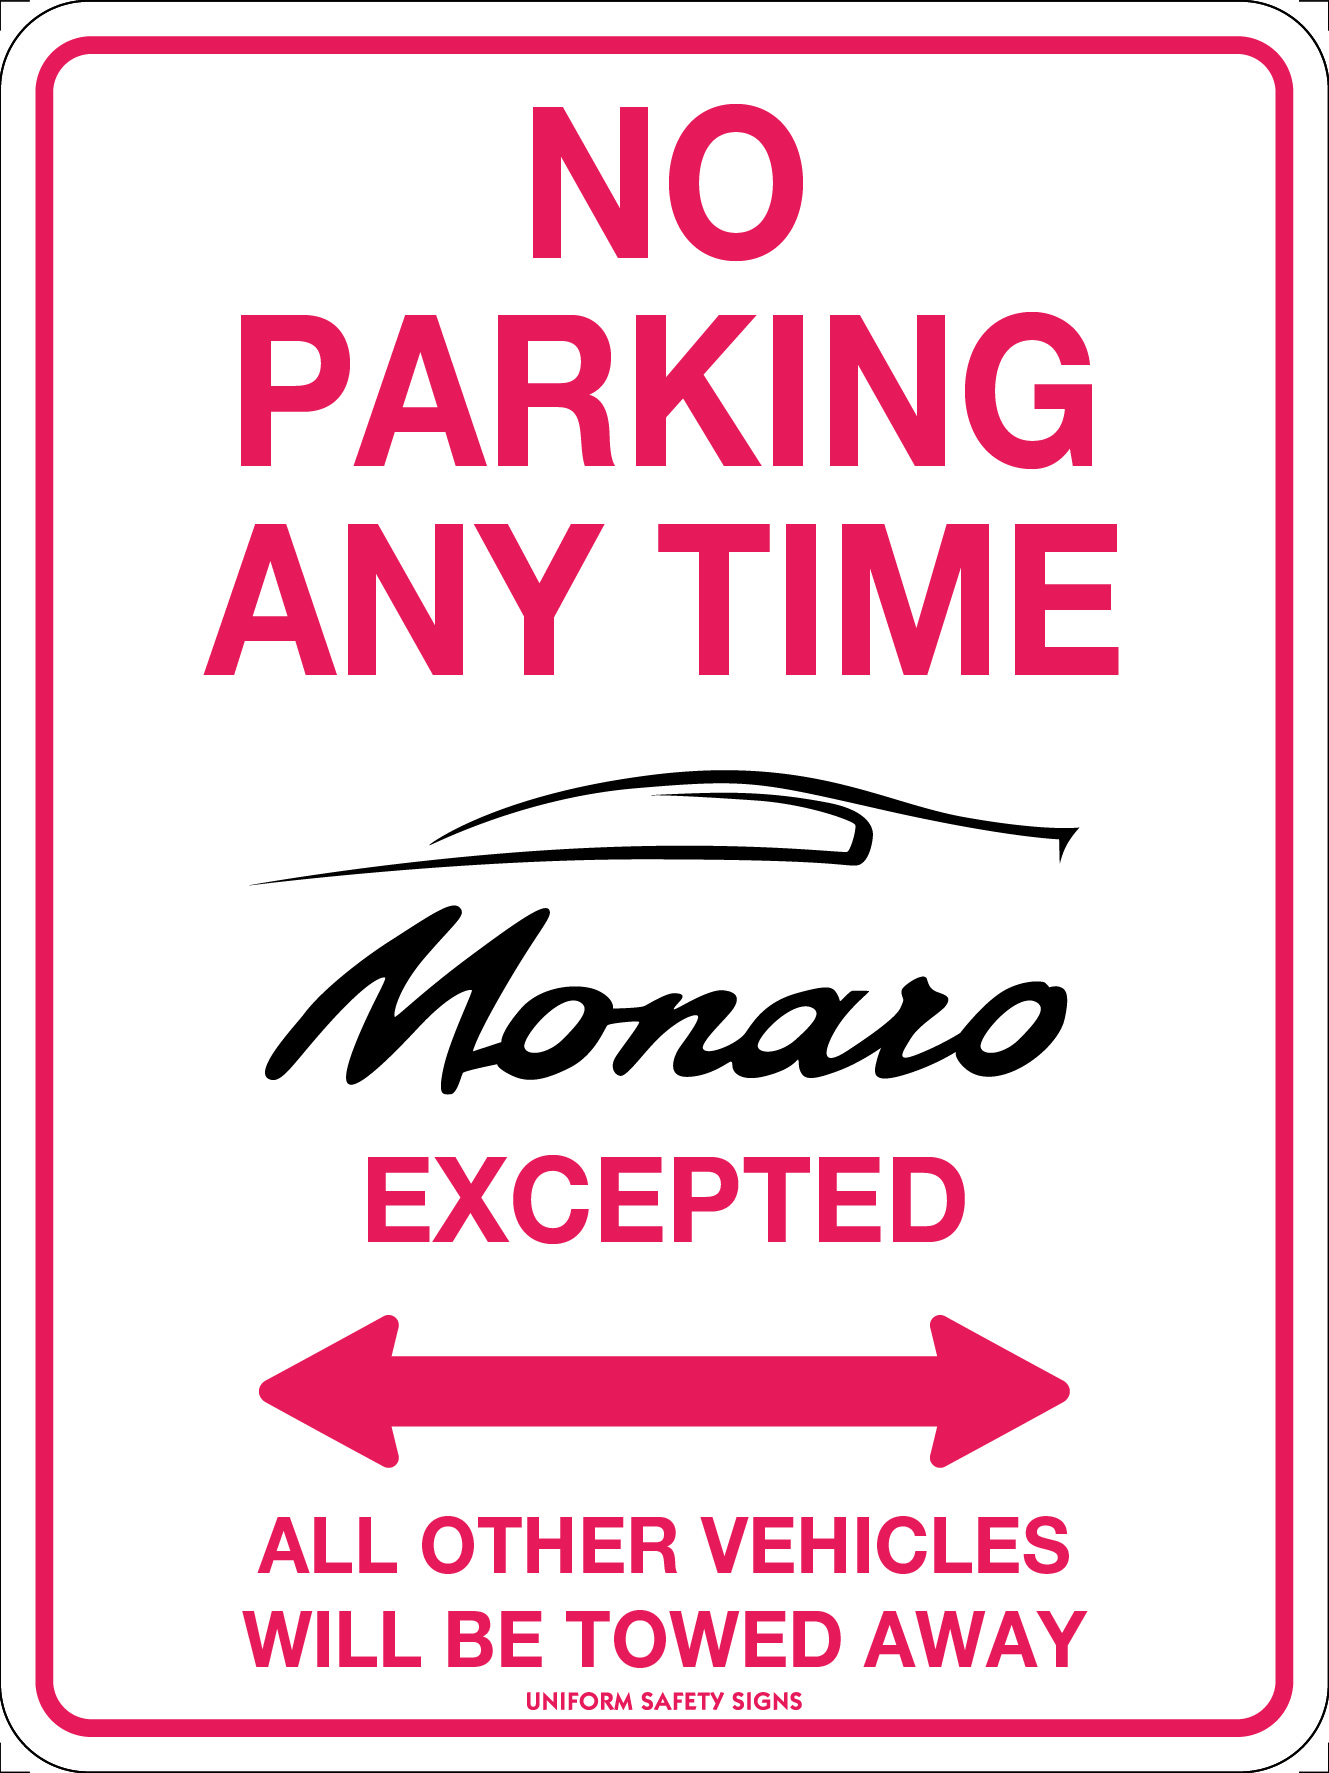 SIGN 300 X 225MM METAL NO PARKING ANYTIME MONARO EXCEPTED